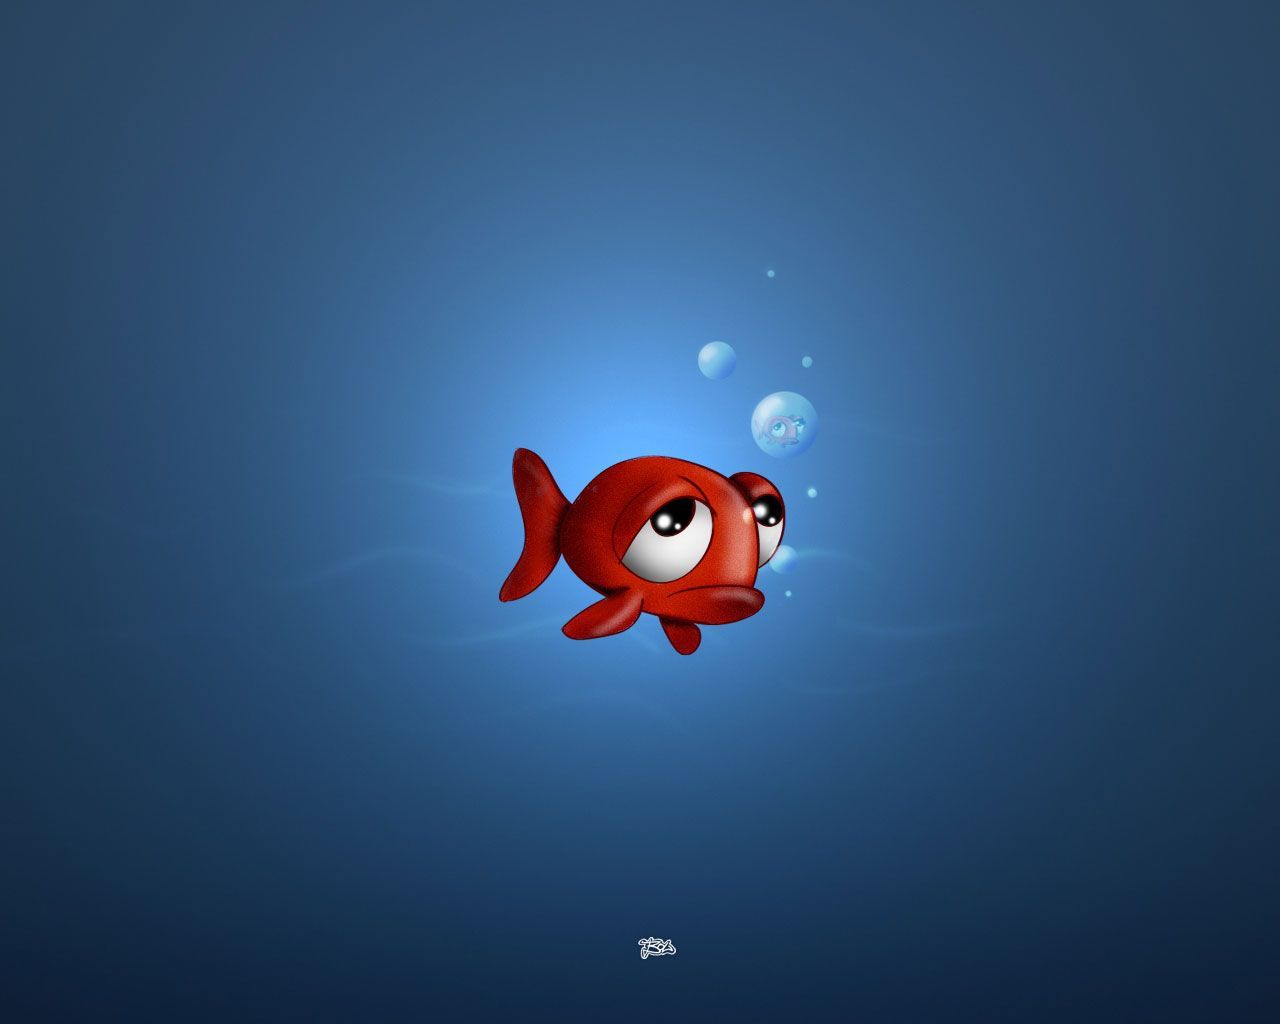 Sadness. Courtesy Wp Content Uploads 2010 11. Animated Wallpaper For Mobile, Cute Wallpaper, Cartoon Fish